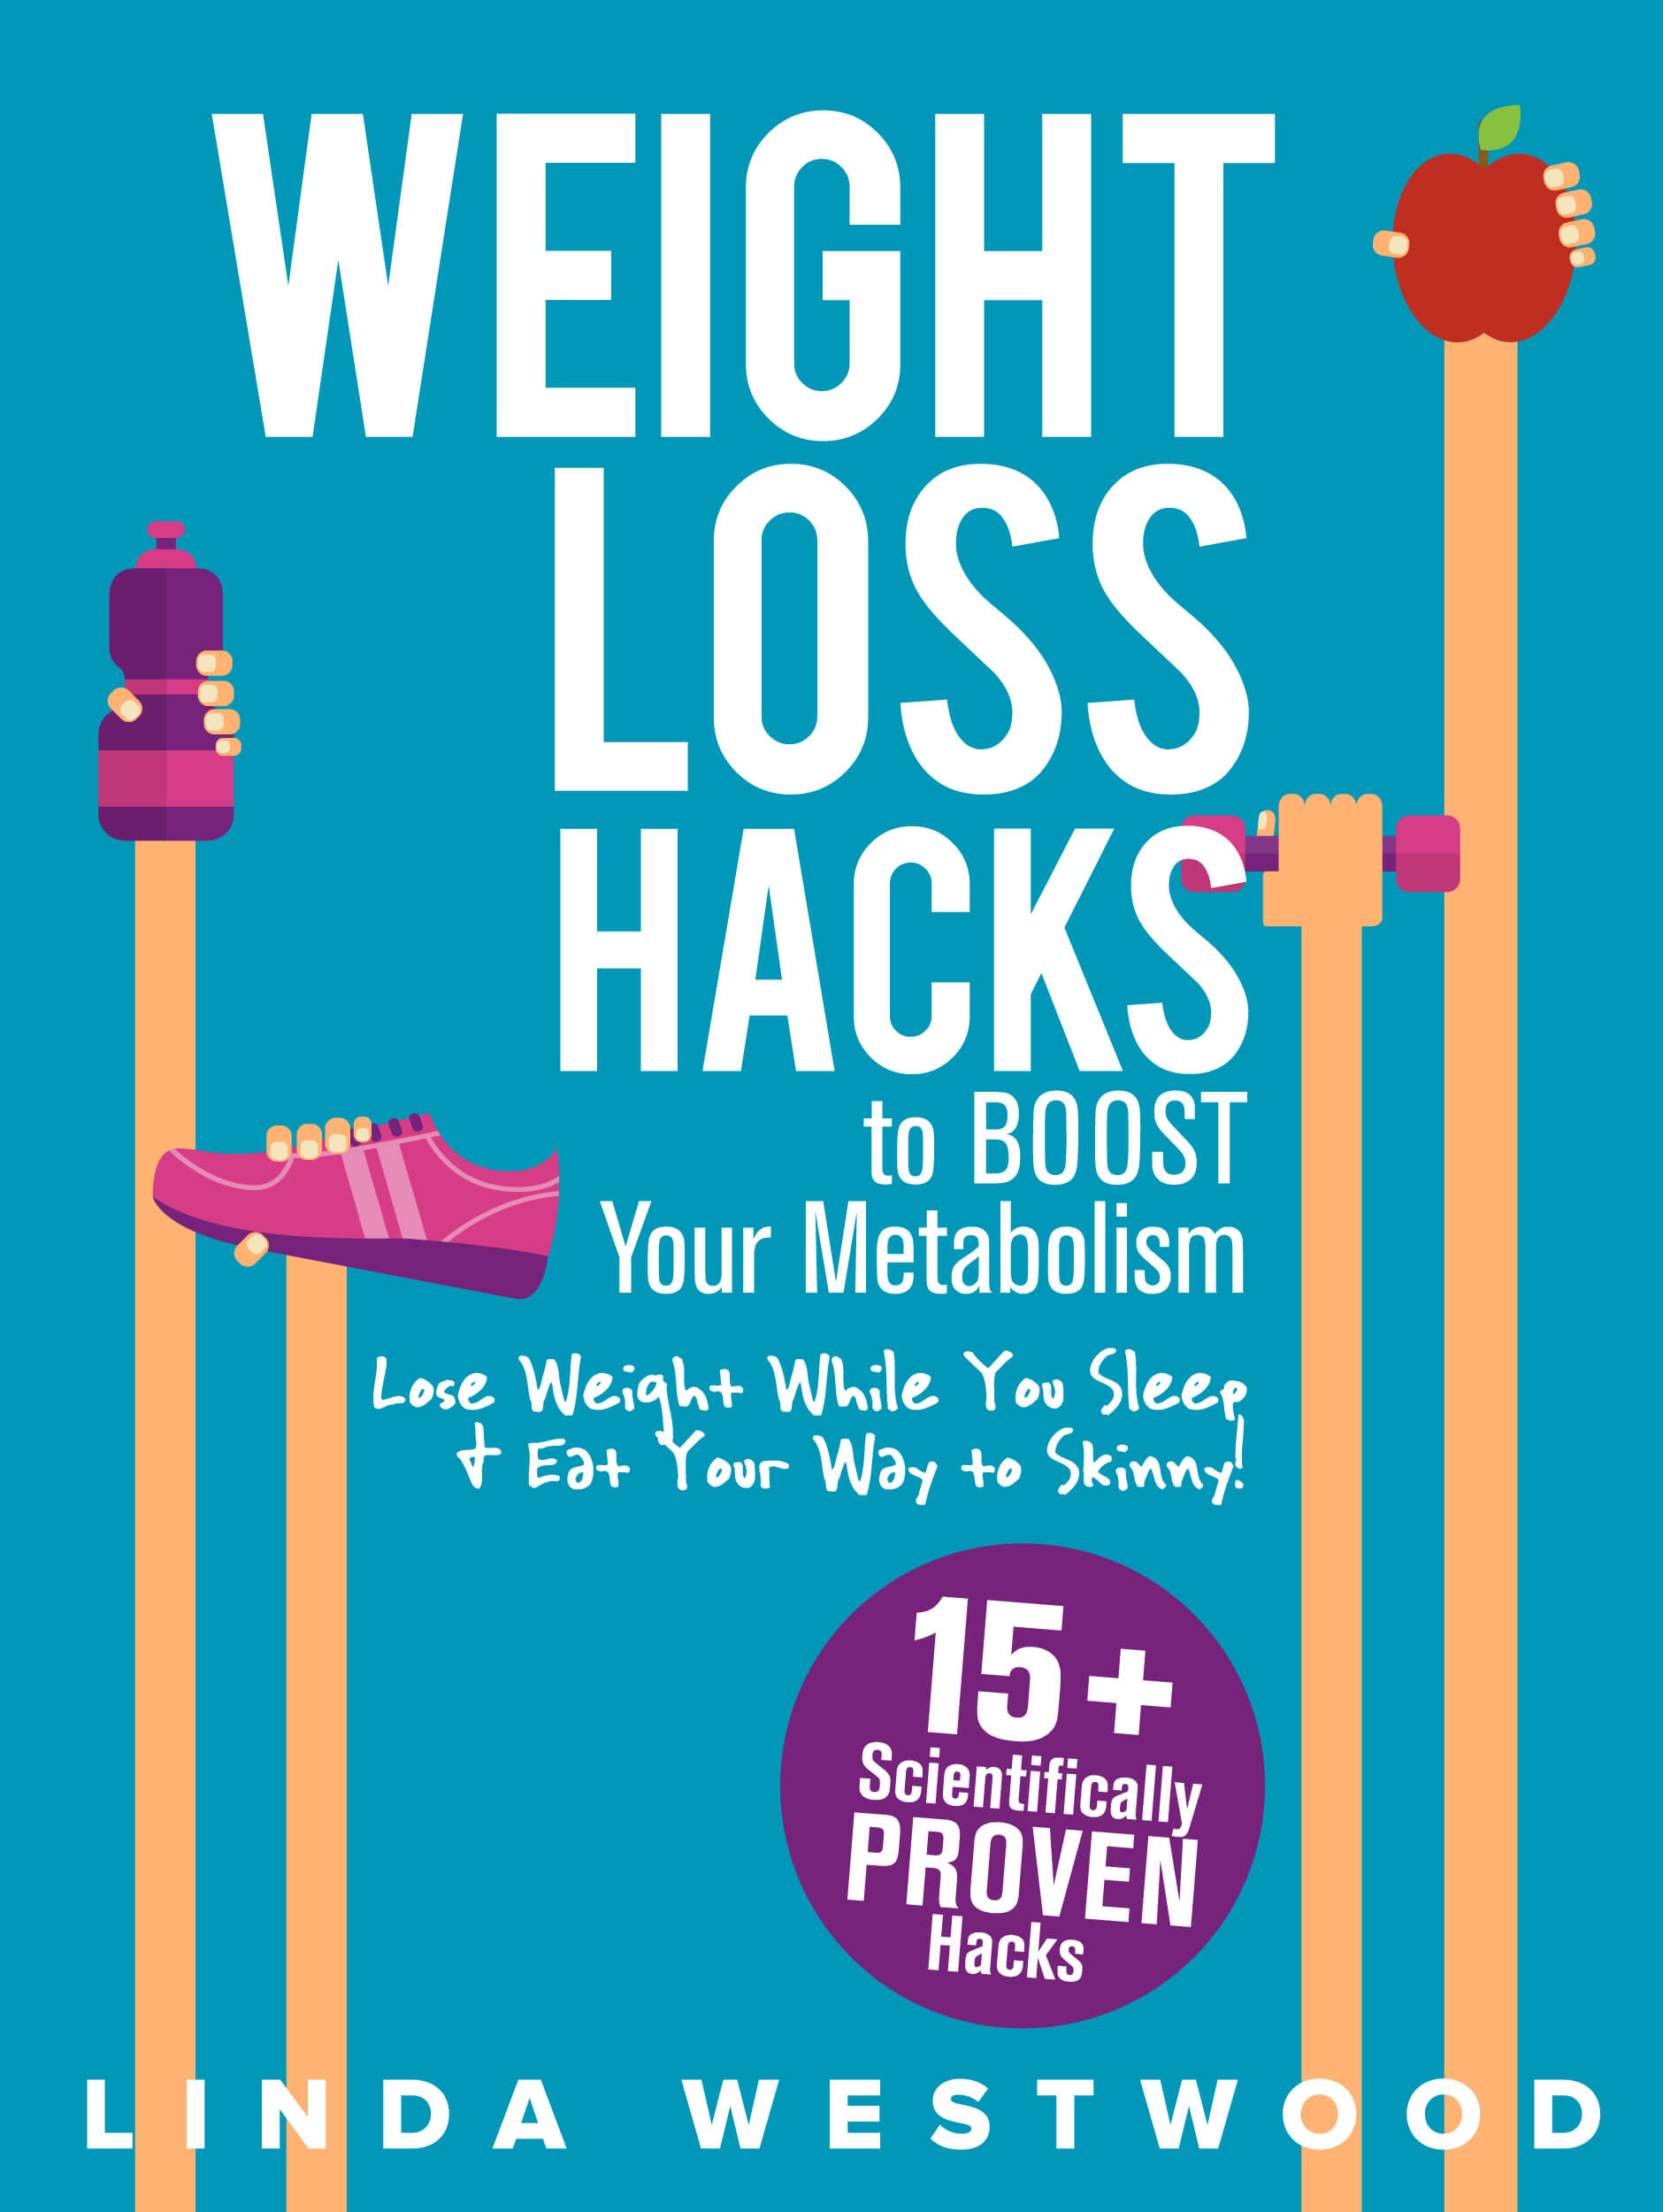 FREE: Weight Loss Hacks: 15+ Scientifically PROVEN Hacks to BOOST Your Metabolism, Lose Weight While You Sleep & Eat Your Way to Skinny! by Linda Westwood